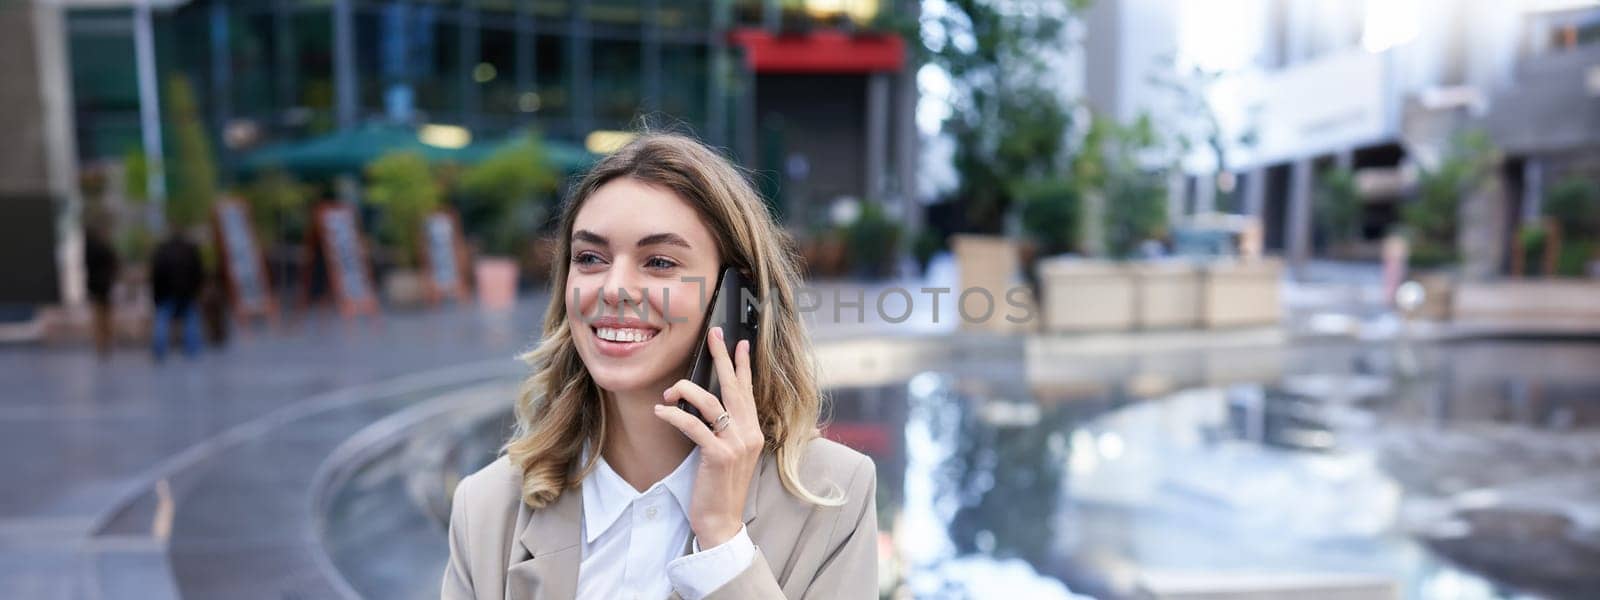 Vertical shot of smiling woman talking on mobile phone while sitting outside. Office lady waiting for someone after work.